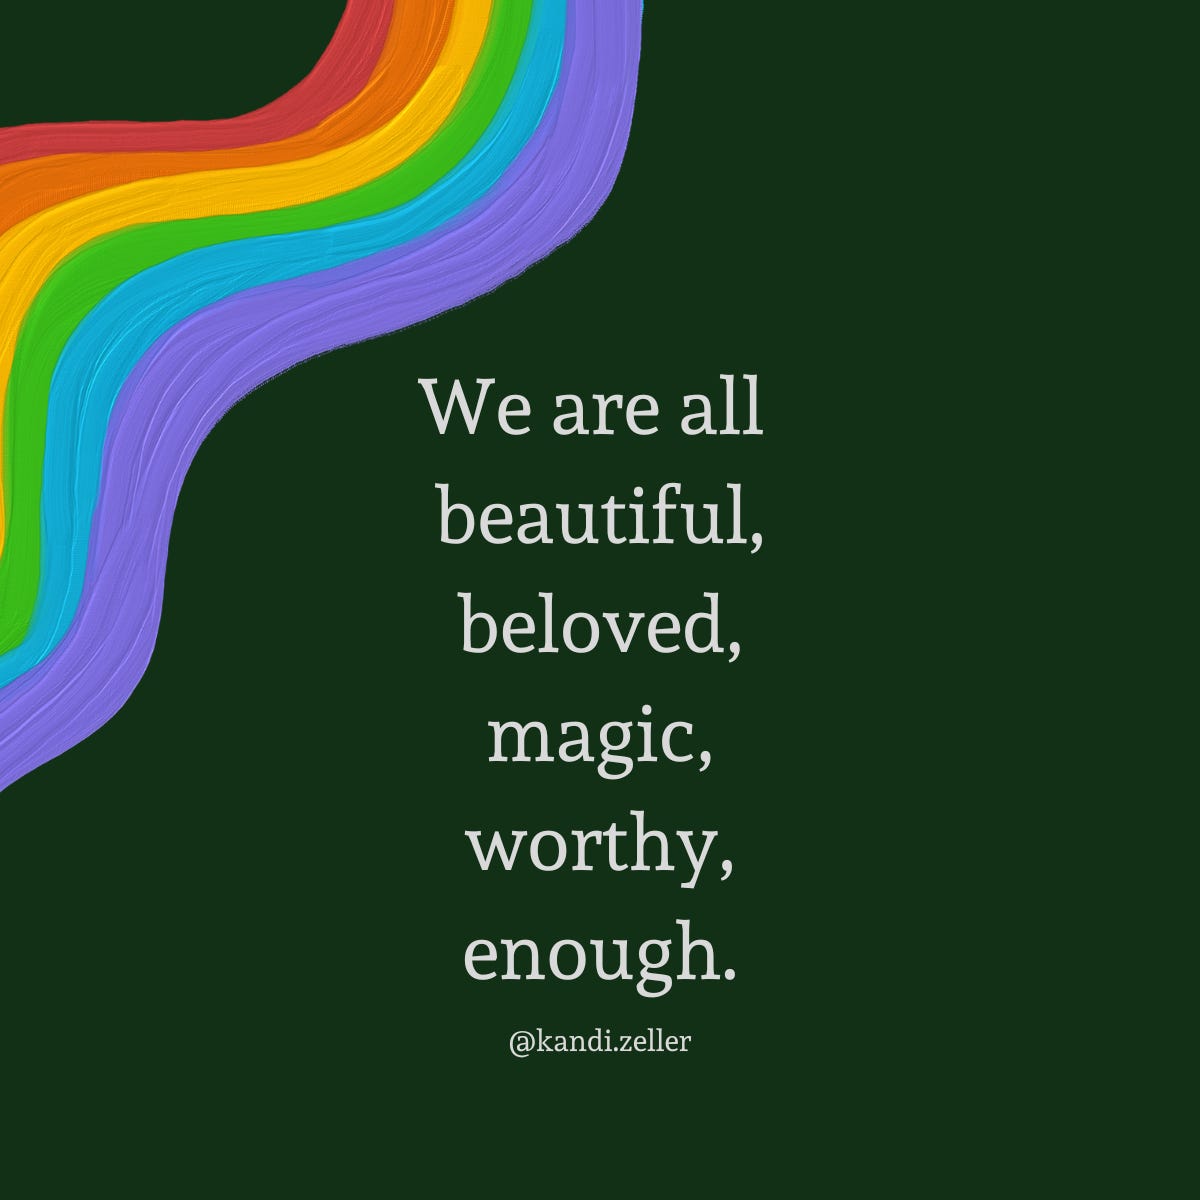 A dark green background, adorned with what looks like a rainbow paint stroke, has white lettering that reads, “We are all beautiful, beloved, magic, worthy, enough.”